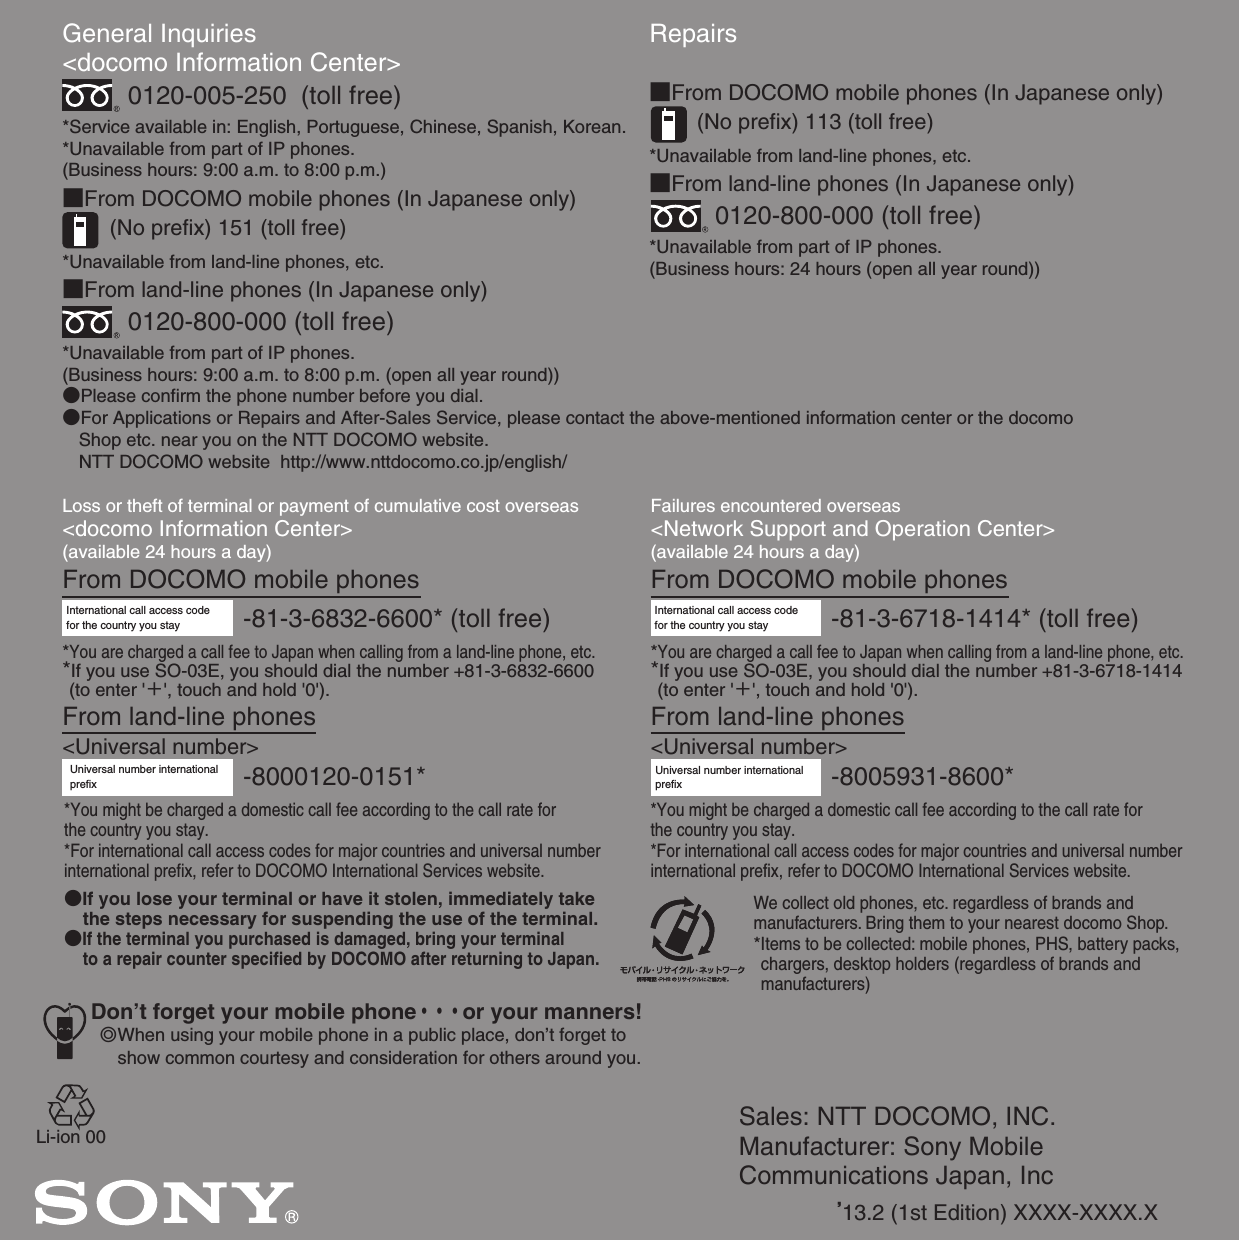 Sales: NTT DOCOMO, INC.Manufacturer: Sony Mobile Communications Japan, Inc’13.2 (1st Edition) XXXX-XXXX.XGeneral Inquiries &lt;docomo Information Center&gt;0120-005-250  (toll free)*Service available in: English, Portuguese, Chinese, Spanish, Korean.*Unavailable from part of IP phones.(Business hours: 9:00 a.m. to 8:00 p.m.)■From DOCOMO mobile phones (In Japanese only)(No prefix) 151 (toll free)*Unavailable from land-line phones, etc.■From land-line phones (In Japanese only)0120-800-000 (toll free)*Unavailable from part of IP phones.(Business hours: 9:00 a.m. to 8:00 p.m. (open all year round))●Please confirm the phone number before you dial.●For Applications or Repairs and After-Sales Service, please contact the above-mentioned information center or the docomo   Shop etc. near you on the NTT DOCOMO website.  NTT DOCOMO website  http://www.nttdocomo.co.jp/english/Loss or theft of terminal or payment of cumulative cost overseas&lt;docomo Information Center&gt; (available 24 hours a day)From DOCOMO mobile phonesFailures encountered overseas&lt;Network Support and Operation Center&gt;(available 24 hours a day)From DOCOMO mobile phonesInternational call access code for the country you stay -81-3-6832-6600* (toll free)*You are charged a call fee to Japan when calling from a land-line phone, etc.*If you use SO-03E, you should dial the number +81-3-6832-6600 (to enter &apos;＋&apos;, touch and hold &apos;0&apos;).From land-line phones&lt;Universal number&gt;Universal number internationalprefix -8000120-0151**You might be charged a domestic call fee according to the call rate for the country you stay.*For international call access codes for major countries and universal number international prefix, refer to DOCOMO International Services website.●If you lose your terminal or have it stolen, immediately take the steps necessary for suspending the use of the terminal.●If the terminal you purchased is damaged, bring your terminal to a repair counter specified by DOCOMO after returning to Japan.Don’t forget your mobile phone・・・or your manners!٧When using your mobile phone in a public place, don’t forget to show common courtesy and consideration for others around you.-81-3-6718-1414* (toll free)International call access code for the country you stay*You are charged a call fee to Japan when calling from a land-line phone, etc.*If you use SO-03E, you should dial the number +81-3-6718-1414 (to enter &apos;＋&apos;, touch and hold &apos;0&apos;).From land-line phones&lt;Universal number&gt;Repairs■From DOCOMO mobile phones (In Japanese only)(No prefix) 113 (toll free)*Unavailable from land-line phones, etc.■From land-line phones (In Japanese only)0120-800-000 (toll free)*Unavailable from part of IP phones.(Business hours: 24 hours (open all year round))-8005931-8600*Universal number internationalprefix*You might be charged a domestic call fee according to the call rate for the country you stay.*For international call access codes for major countries and universal number international prefix, refer to DOCOMO International Services website.We collect old phones, etc. regardless of brands and manufacturers. Bring them to your nearest docomo Shop.*Items to be collected: mobile phones, PHS, battery packs, chargers, desktop holders (regardless of brands and manufacturers)Li-ion 00